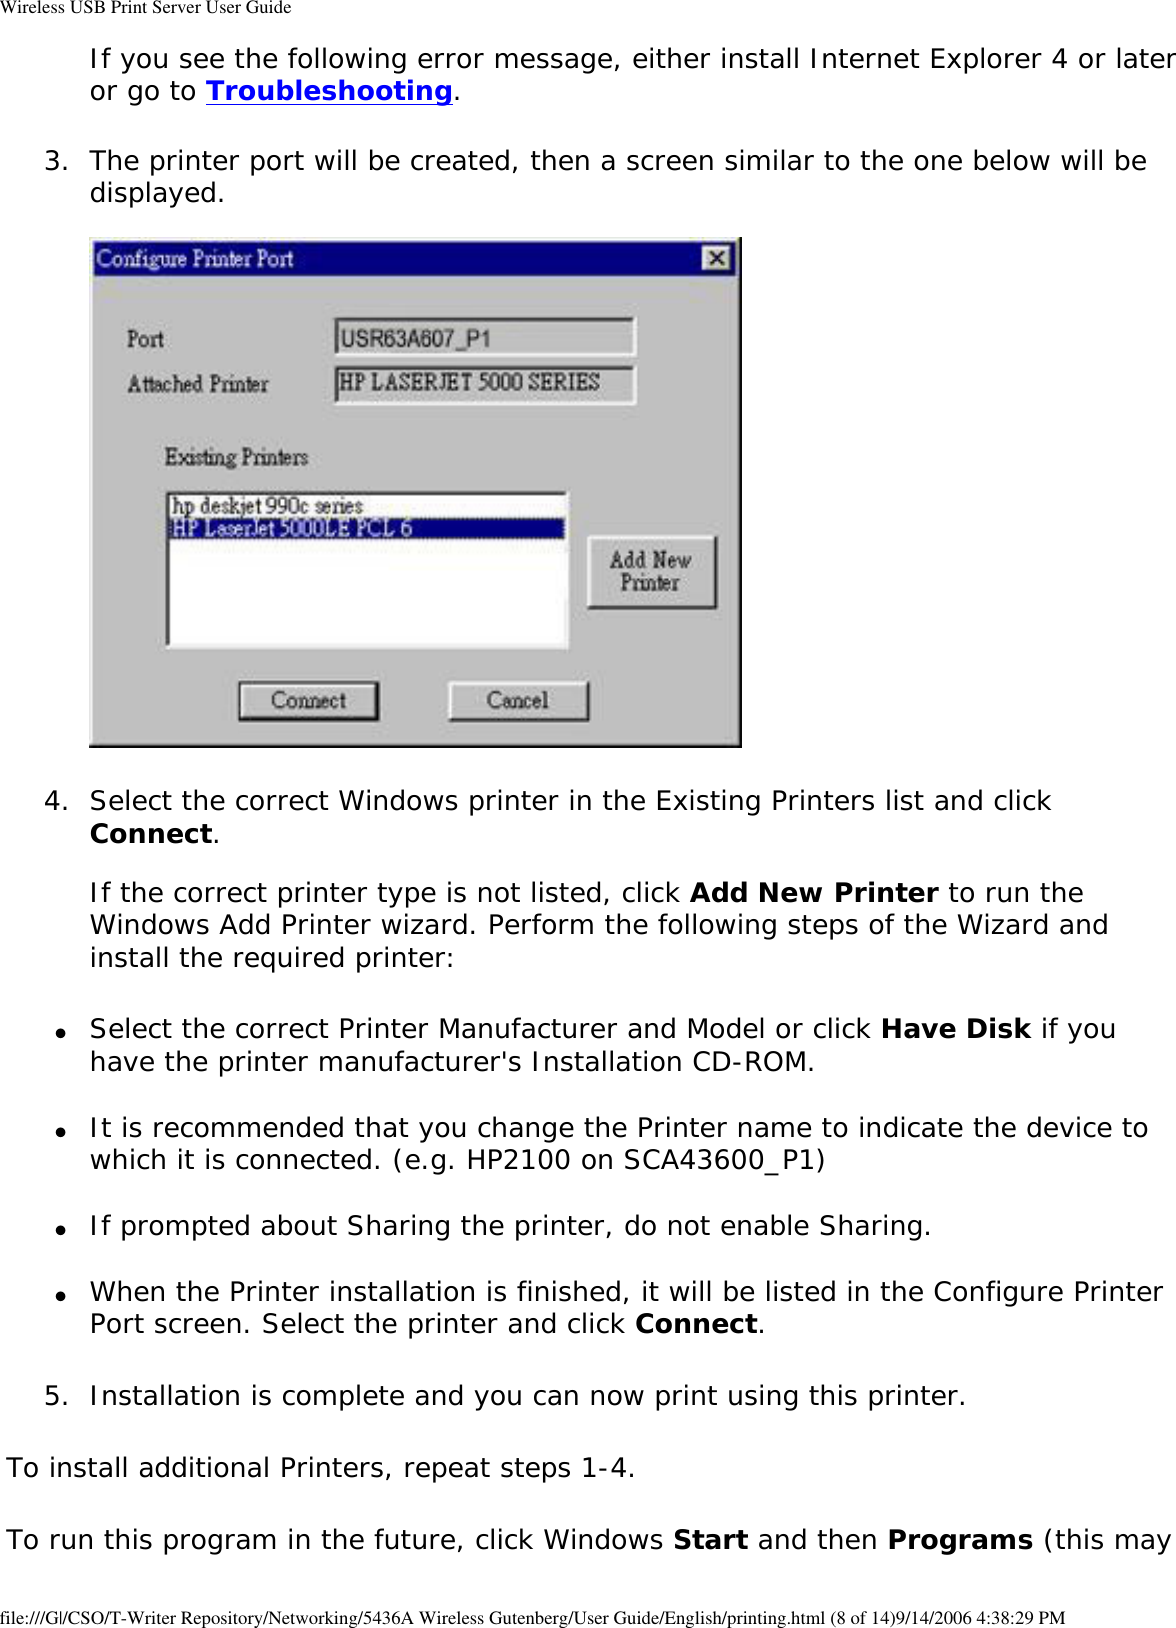 Wireless USB Print Server User GuideIf you see the following error message, either install Internet Explorer 4 or later or go to Troubleshooting. 3.  The printer port will be created, then a screen similar to the one below will be displayed.   4.  Select the correct Windows printer in the Existing Printers list and click Connect.  If the correct printer type is not listed, click Add New Printer to run the Windows Add Printer wizard. Perform the following steps of the Wizard and install the required printer: ●     Select the correct Printer Manufacturer and Model or click Have Disk if you have the printer manufacturer&apos;s Installation CD-ROM. ●     It is recommended that you change the Printer name to indicate the device to which it is connected. (e.g. HP2100 on SCA43600_P1) ●     If prompted about Sharing the printer, do not enable Sharing. ●     When the Printer installation is finished, it will be listed in the Configure Printer Port screen. Select the printer and click Connect. 5.  Installation is complete and you can now print using this printer. To install additional Printers, repeat steps 1-4.To run this program in the future, click Windows Start and then Programs (this may file:///G|/CSO/T-Writer Repository/Networking/5436A Wireless Gutenberg/User Guide/English/printing.html (8 of 14)9/14/2006 4:38:29 PM